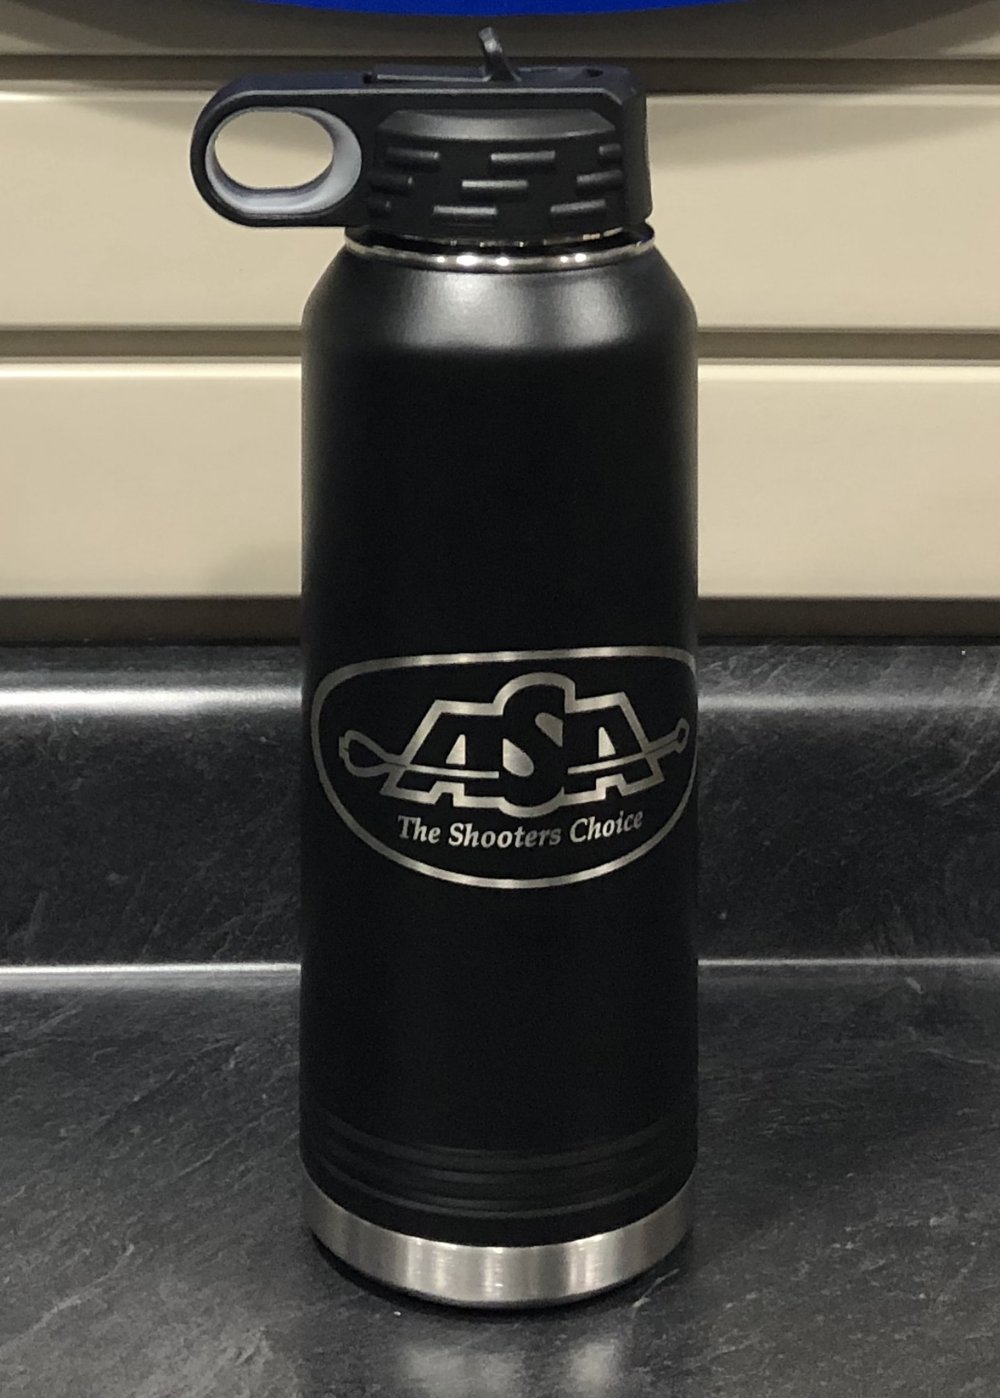 Stainless Steel water bottle 20 oz with option for engraving